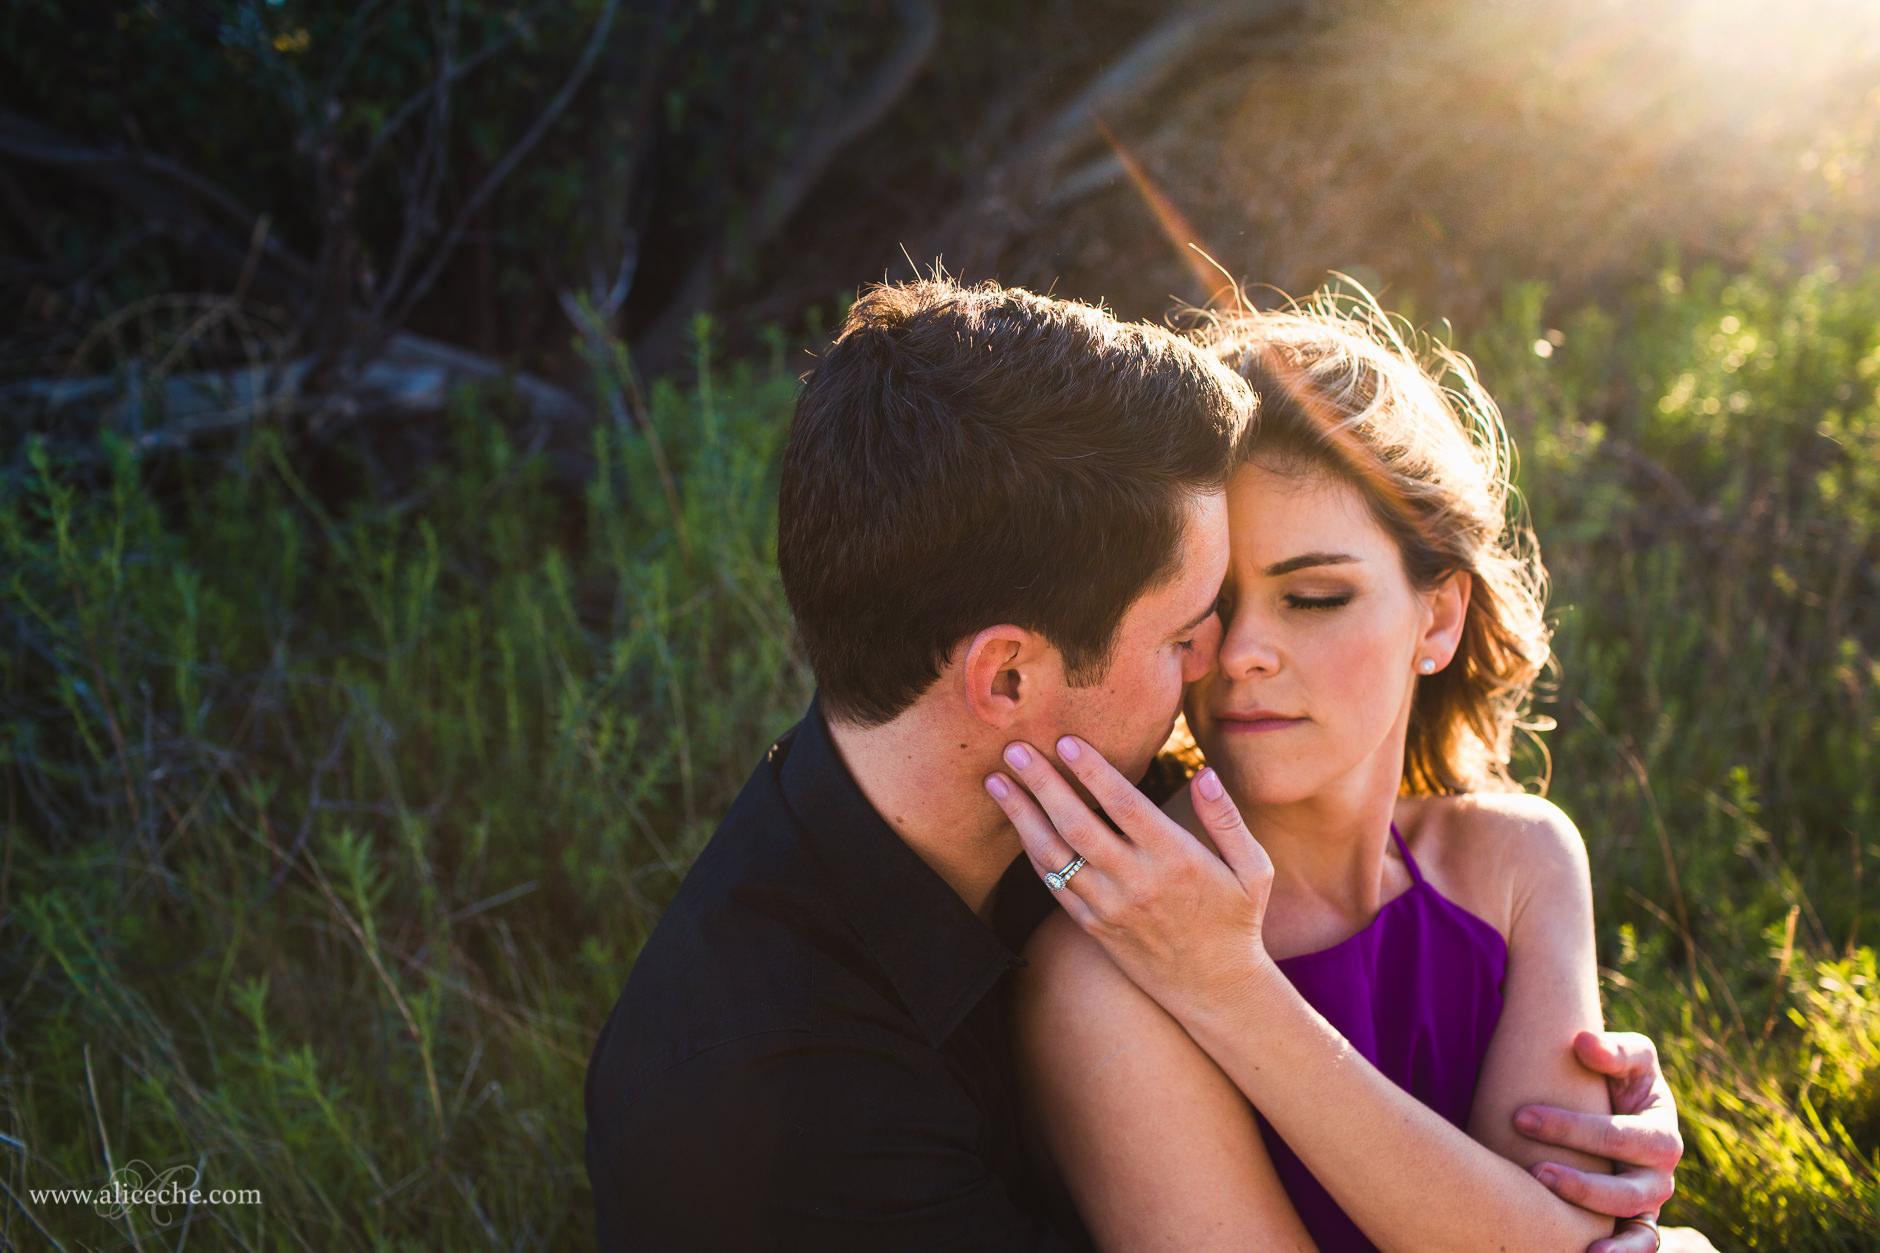 alice-che-photography-destination-wedding-photographer-couple-in-beautiful-backlight